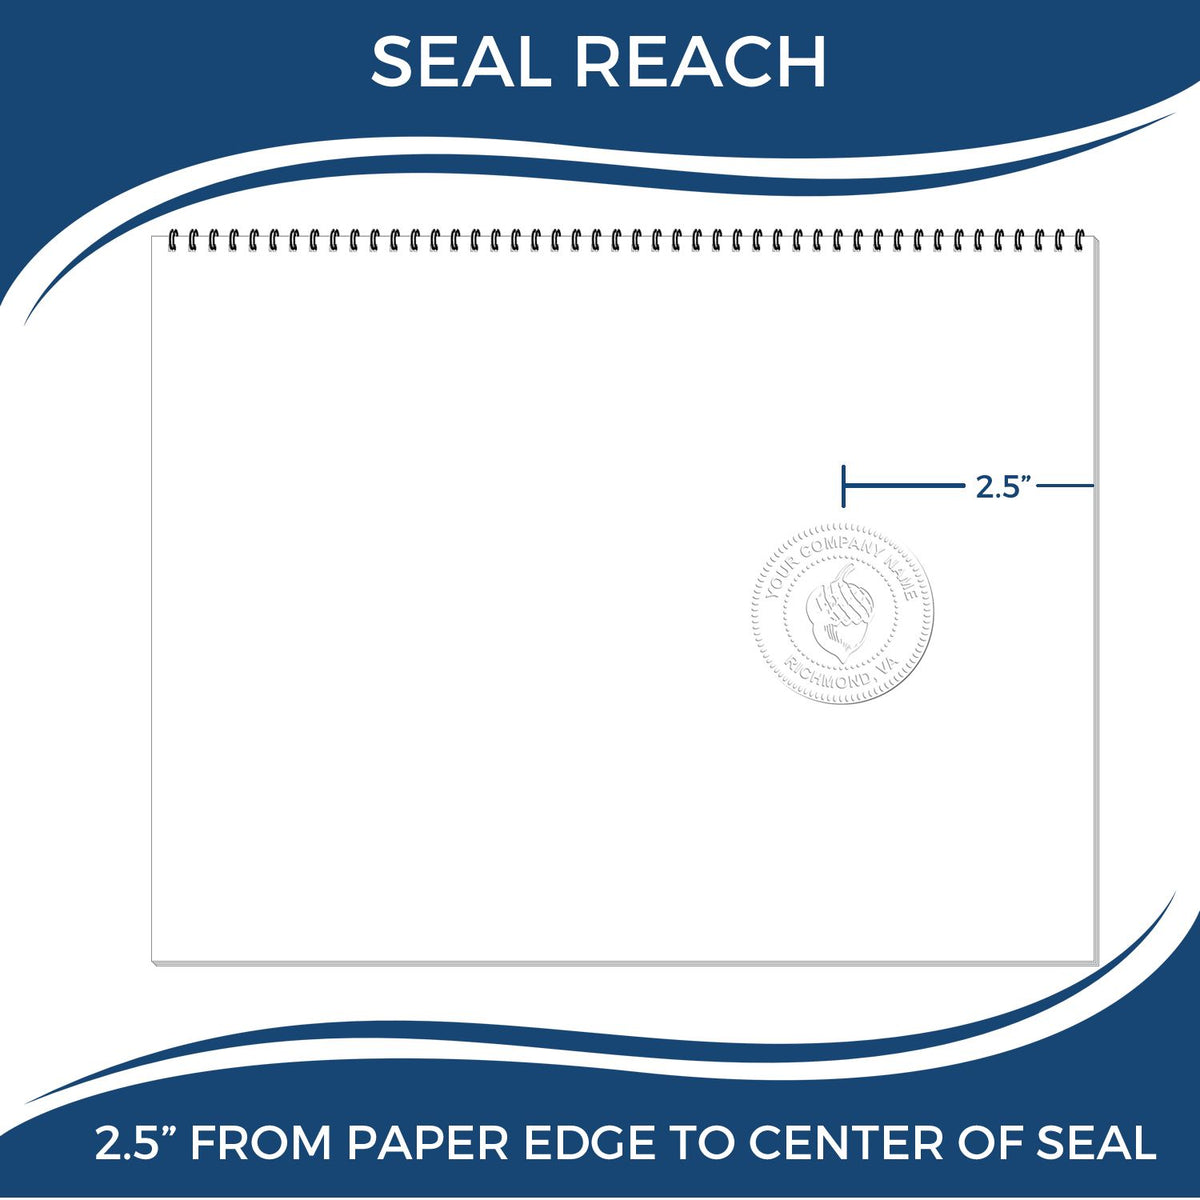 An infographic showing the seal reach which is represented by a ruler and a miniature seal image of the State of Tennessee Long Reach Architectural Embossing Seal